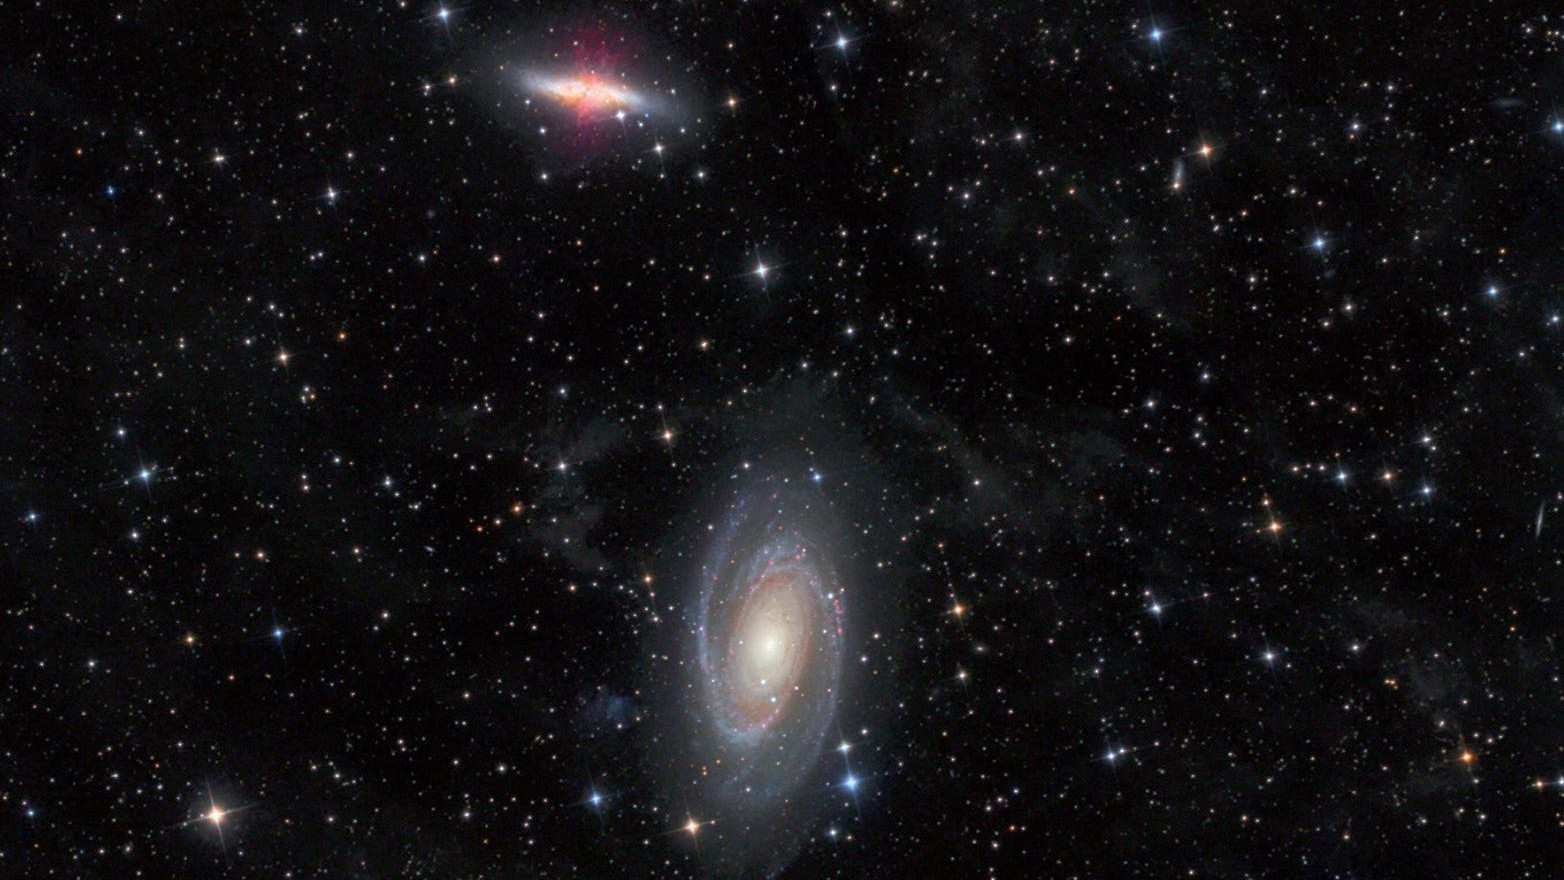 Galaxies M81 and M82 in the the constellation of Ursa Major captured with a 4.5-inch Newtonian telescope with a focal length of 440 mm. Michael Deger / CCD Guide